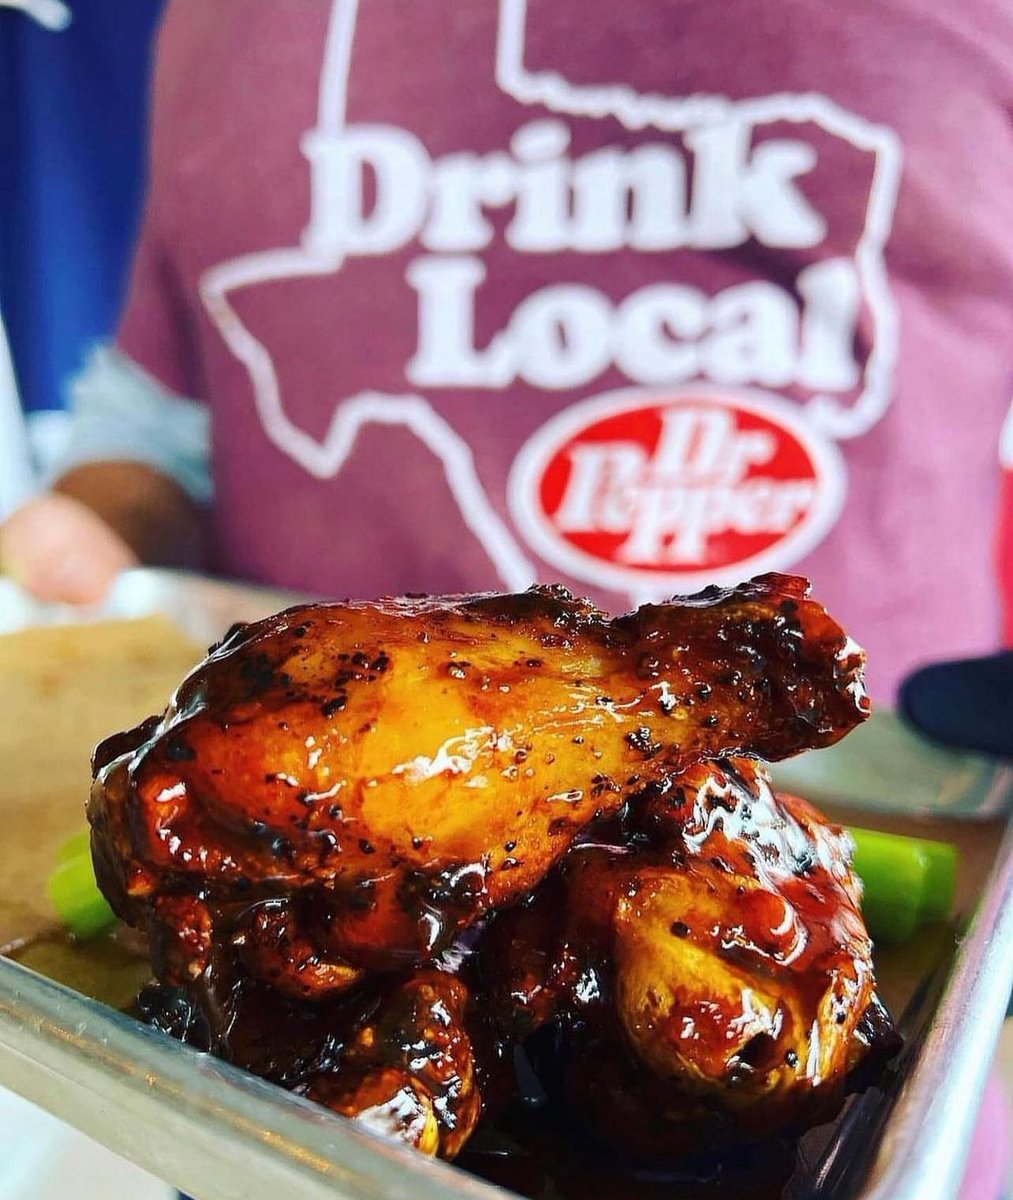 🔥 OAK SMOKED “FLAMING DR PEPPER” WINGS 🔥 are on deck for your #SundayFunday Every Sunday we feature a 1 day only special house sauce in addition to our everyday sauces. Ready at 11am #Sunday #TexasBBQ #BBQ #AustinTexas #ATX #SmokedMeats #AustinEats #AustinBBQ #ChickenWings